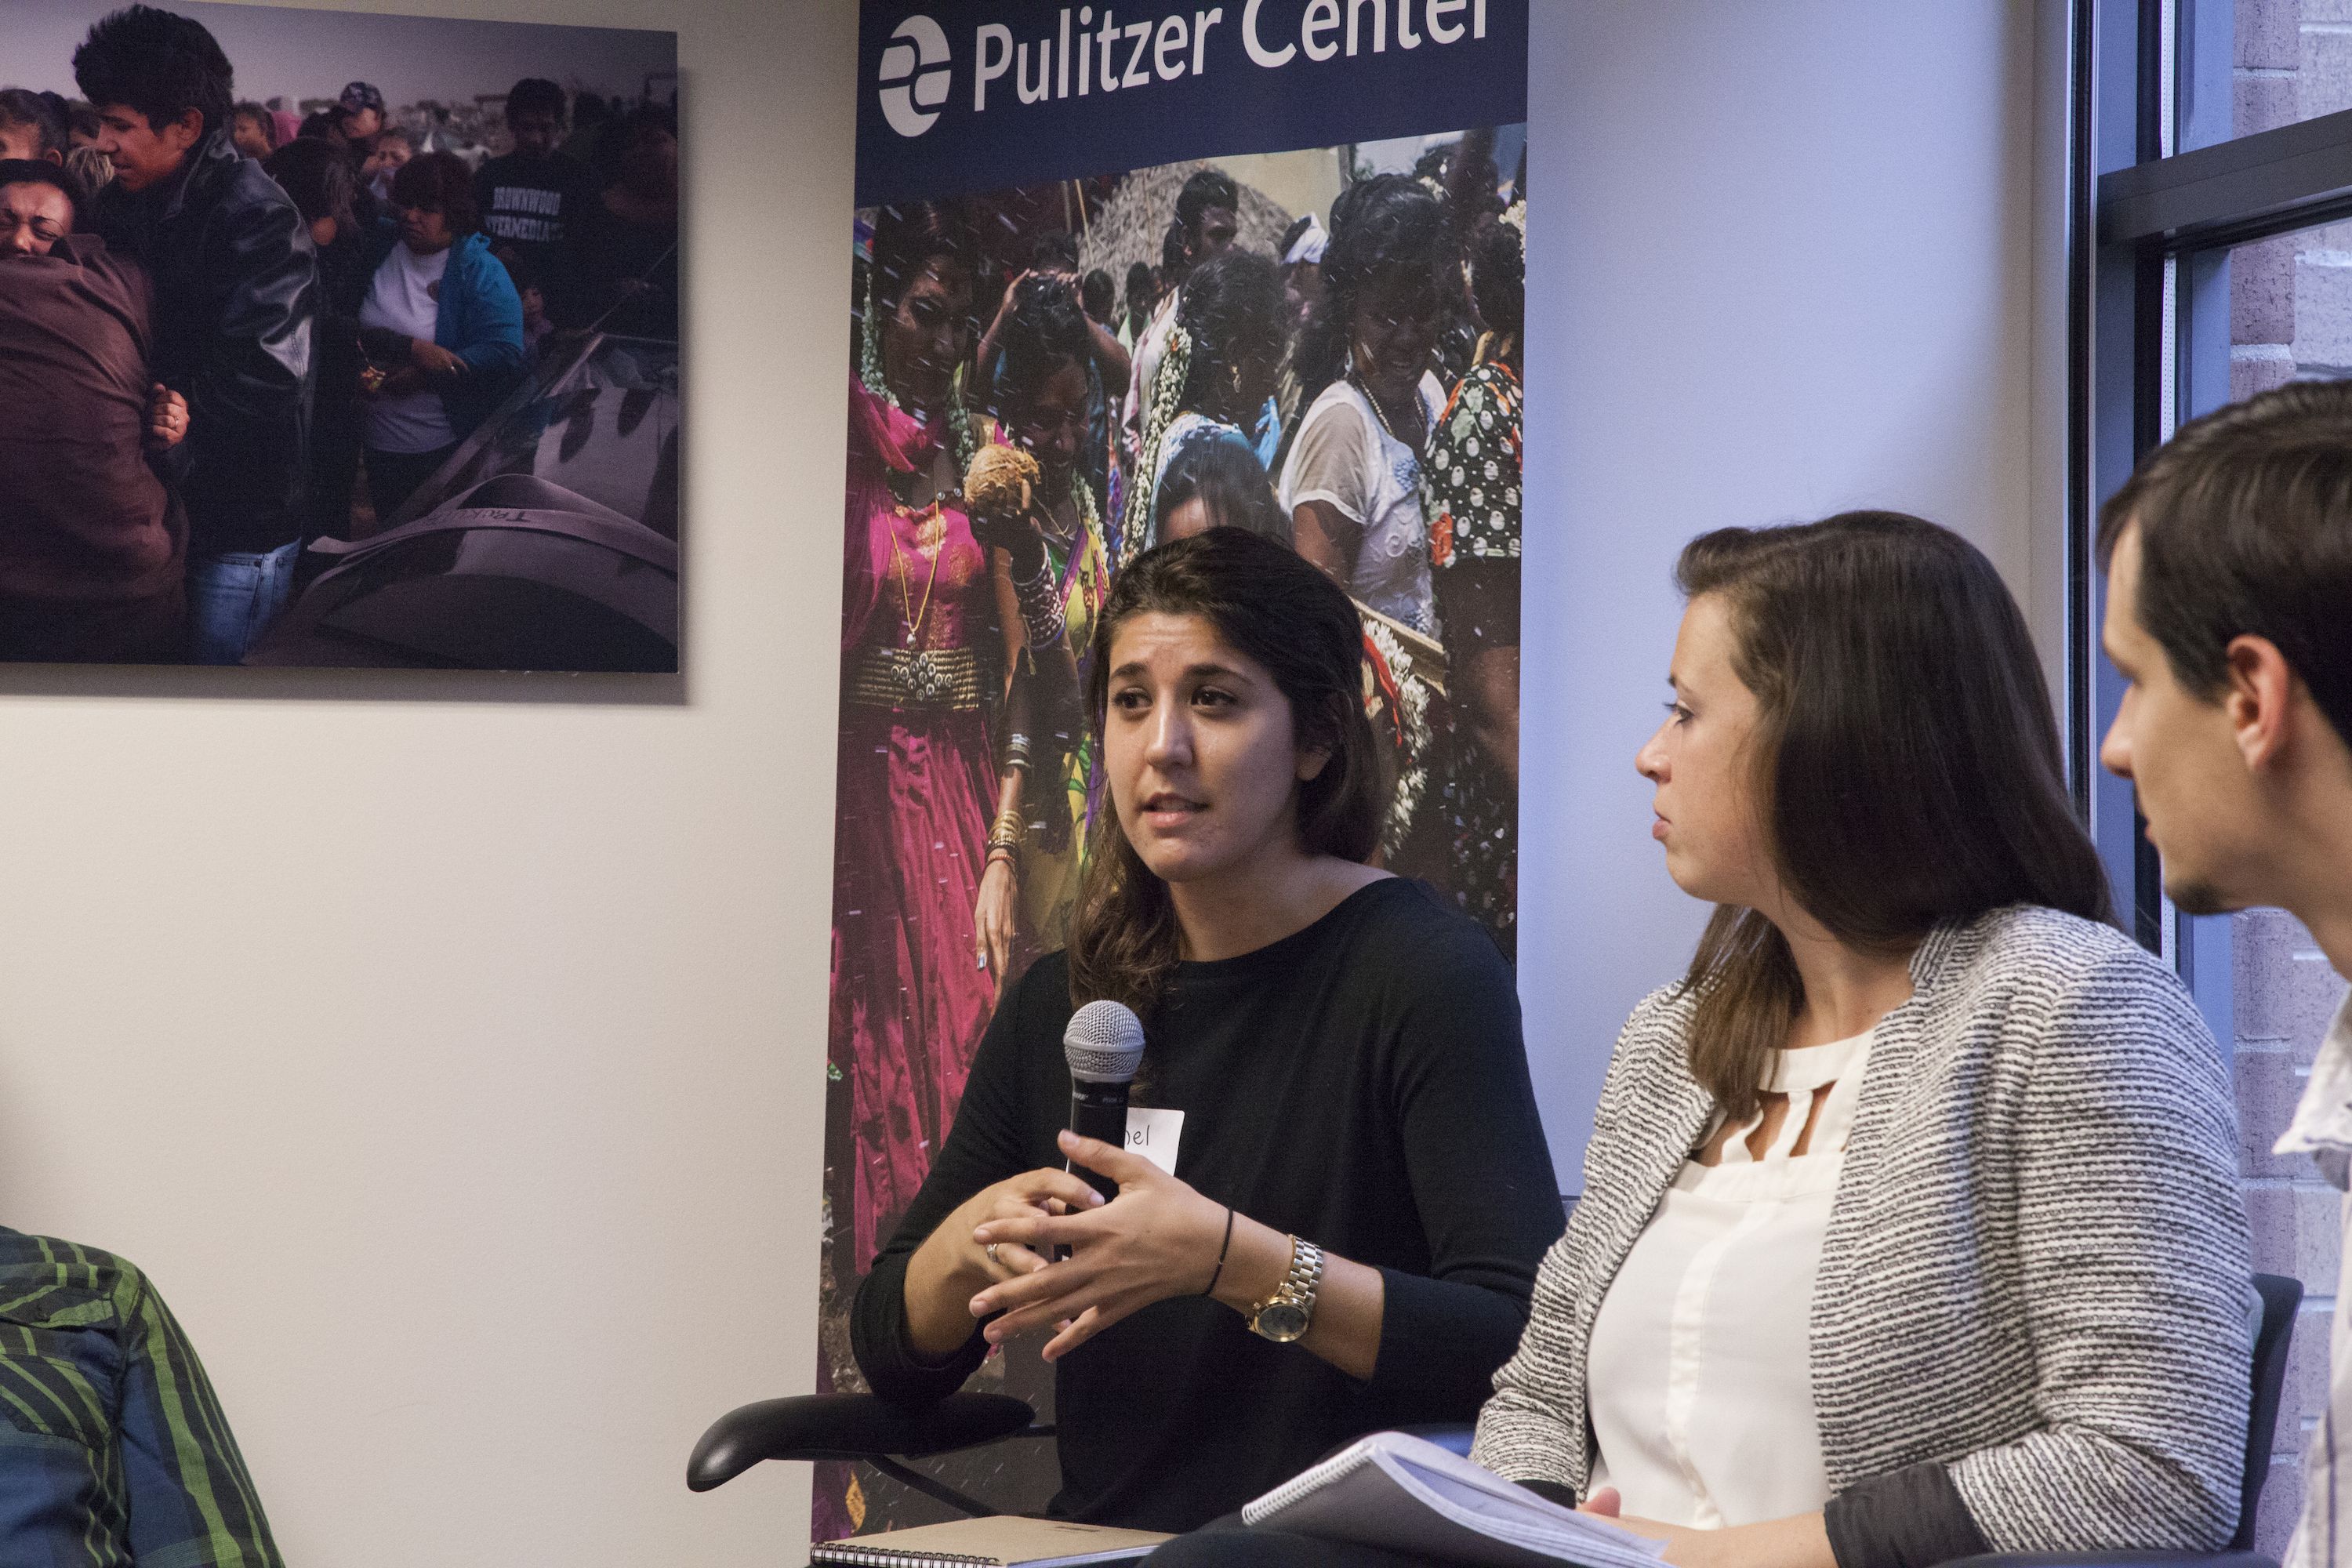 University of Pennsylvania fellow Rachel Townzen answers questions about her reporting on refugees and lack of technology in Jordan. Image by Jin Ding. Washington, D.C., 2016.